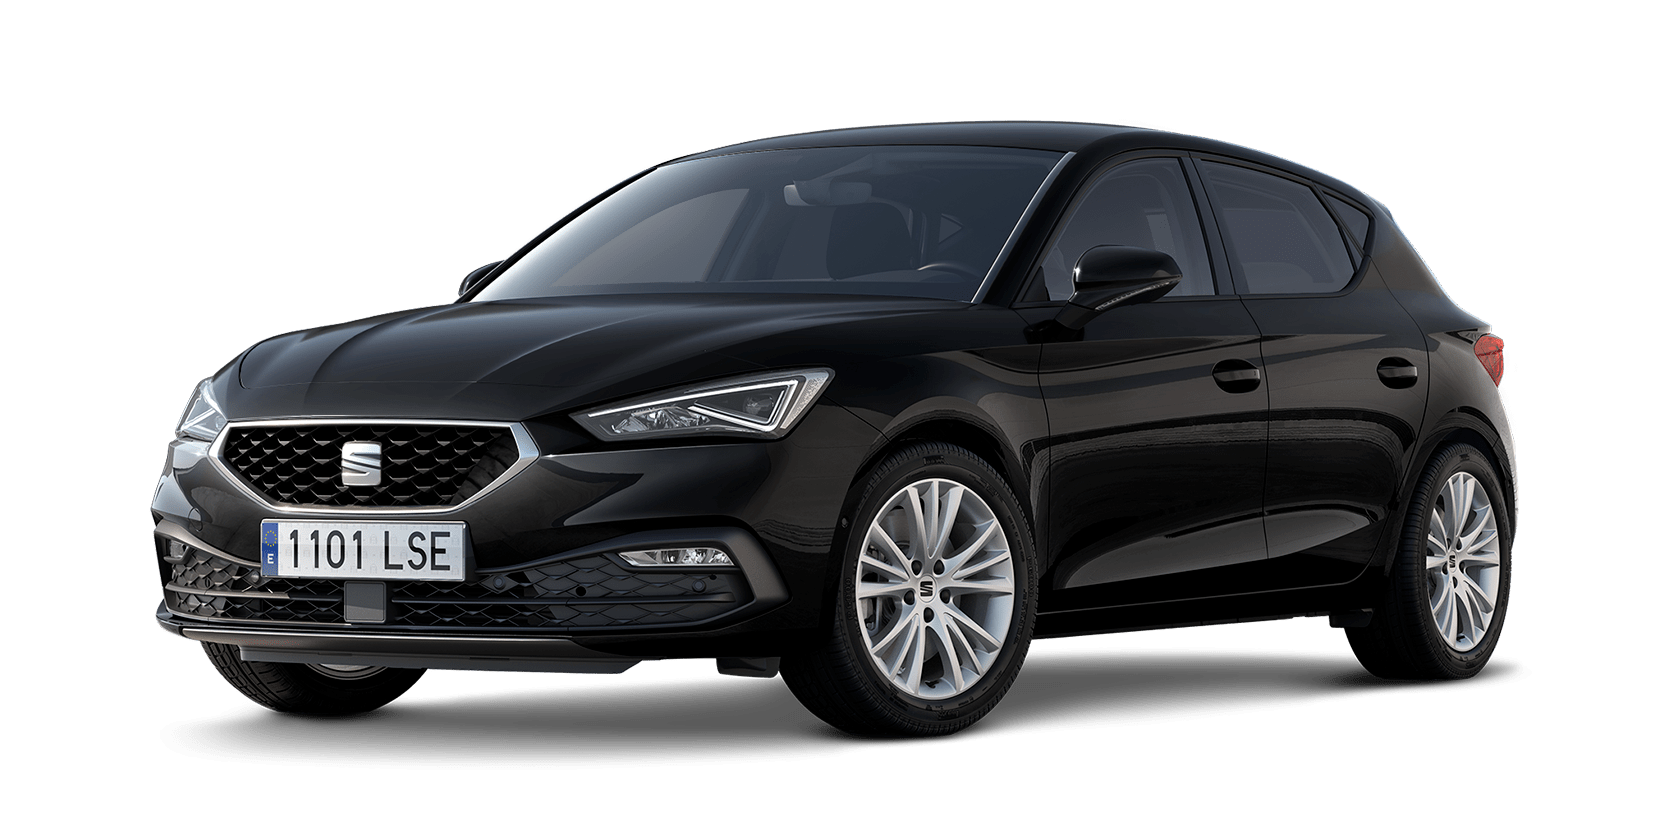 seat leon 5d style trim midnight black colour with dynamic alloy wheels